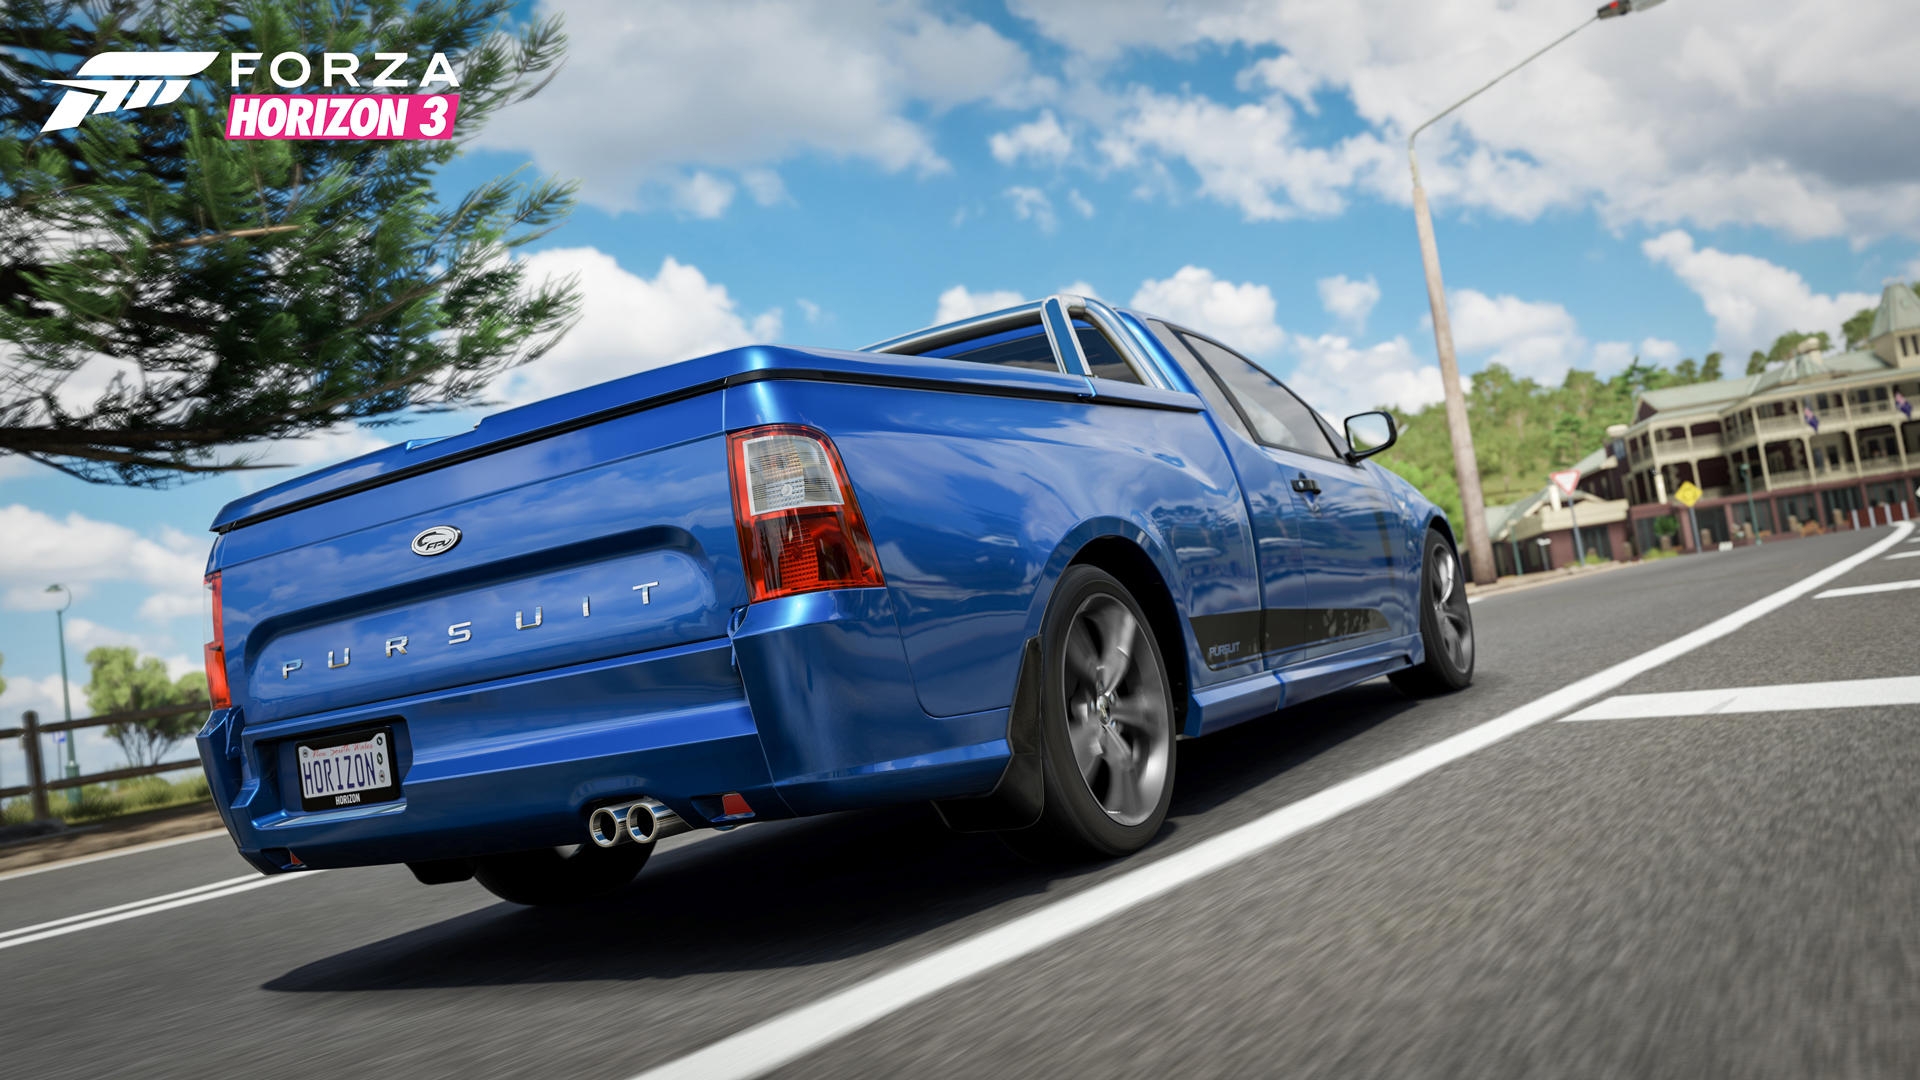 Free photo Blue pickup truck in the game forza horizon 3